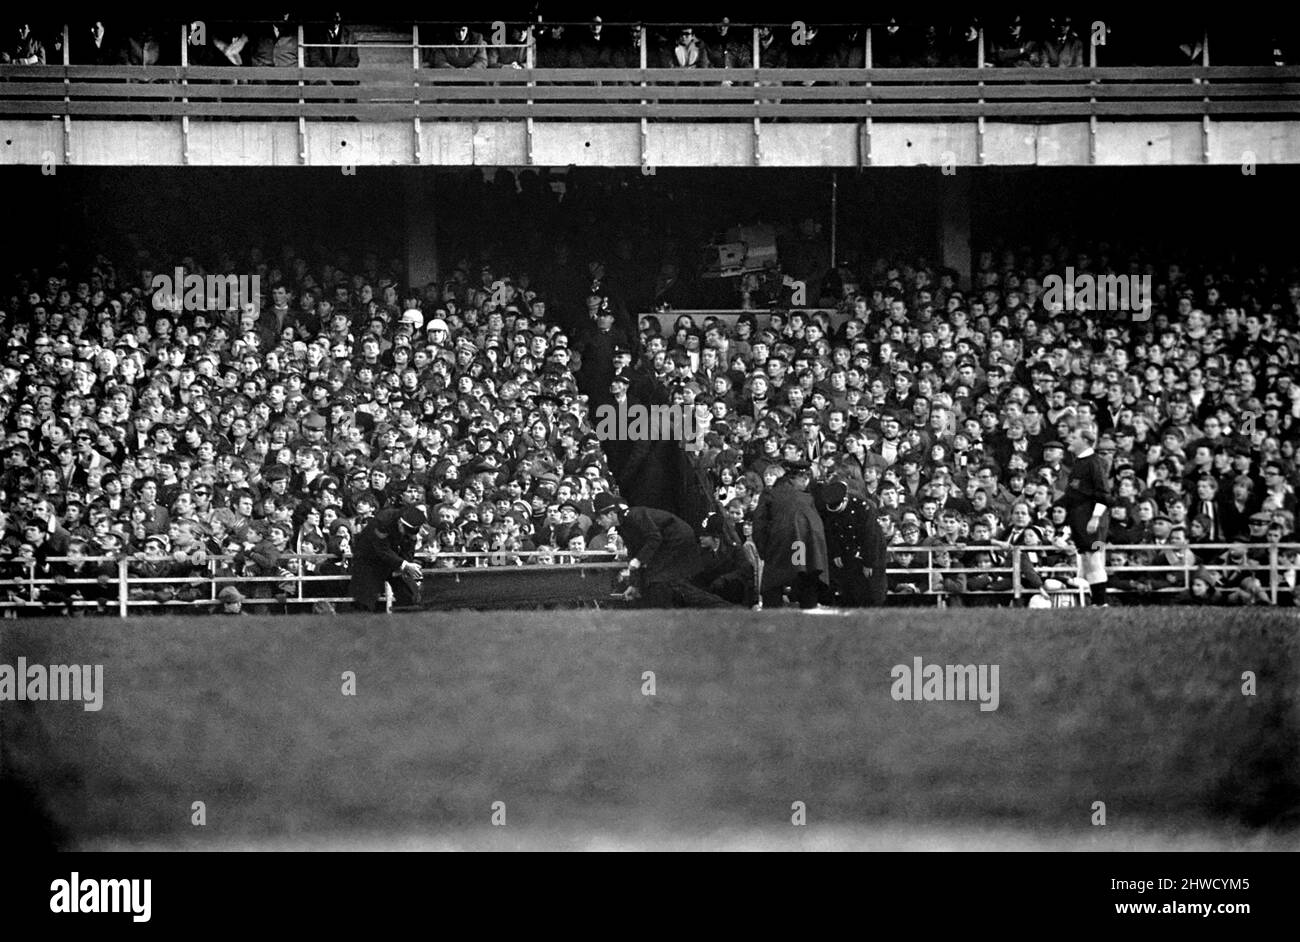 Derby v. Nottingham Forest. Police and St. John mt. men at the trouble spot in the crowed. December 1969 Z11534-013 Stock Photo